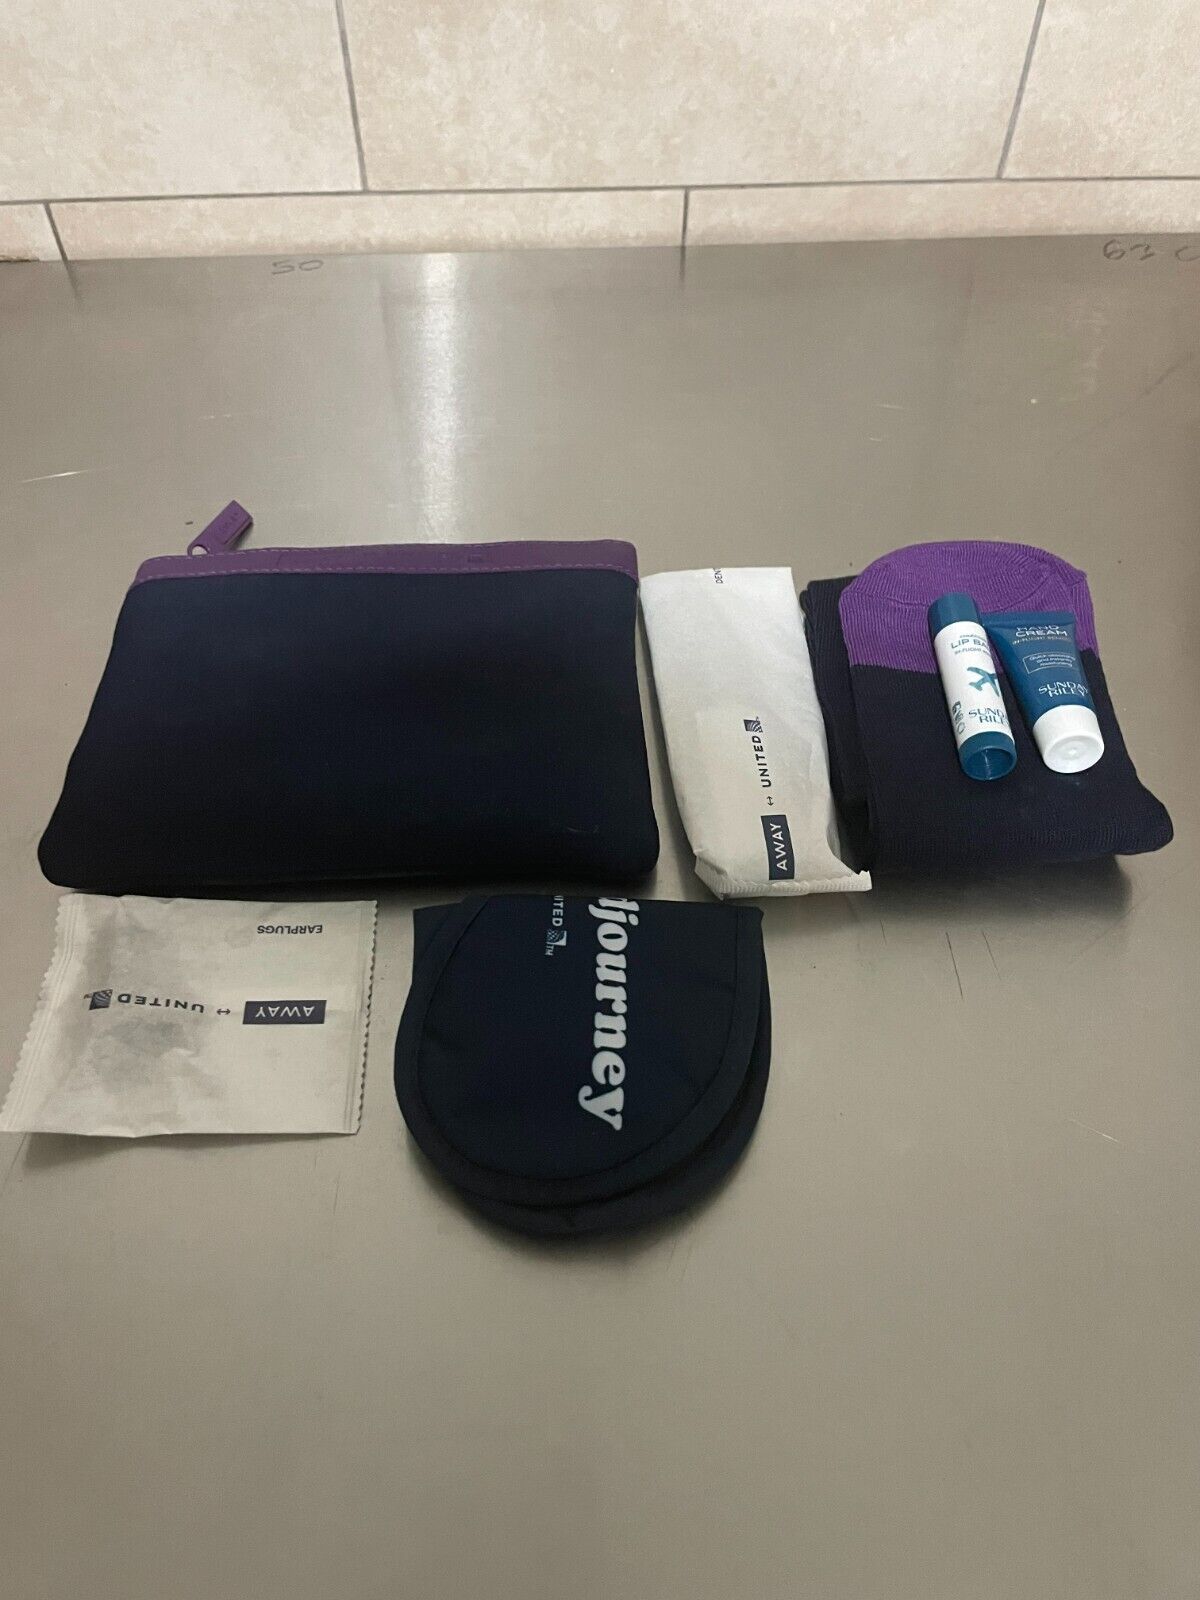 [UNITED AIRLINES] [UA] Business Class Away Amenity Zippered Kit, As pictured